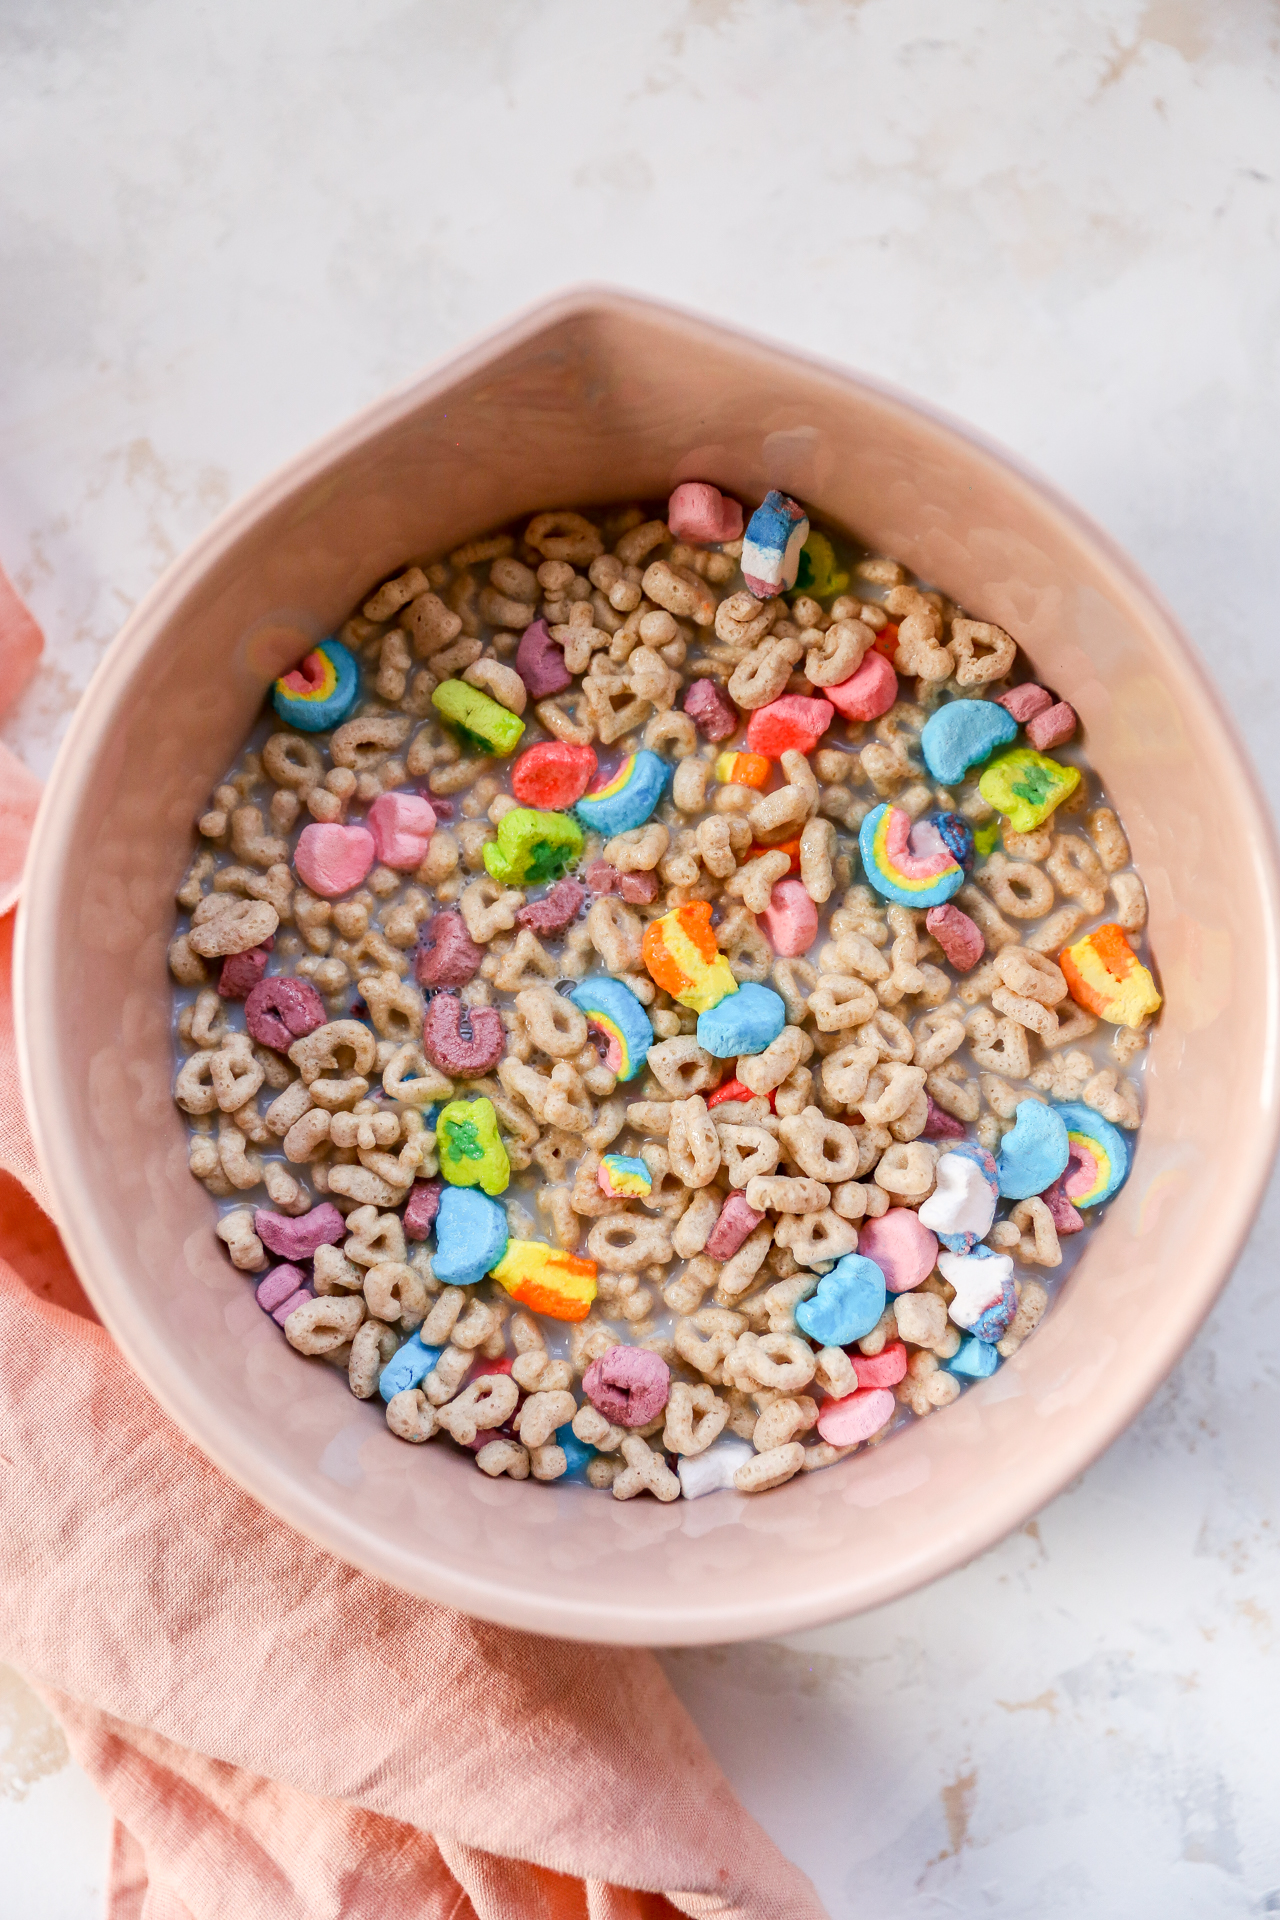 This Genius Cereal Bowl Separates Your Milk and Cereal To Prevent